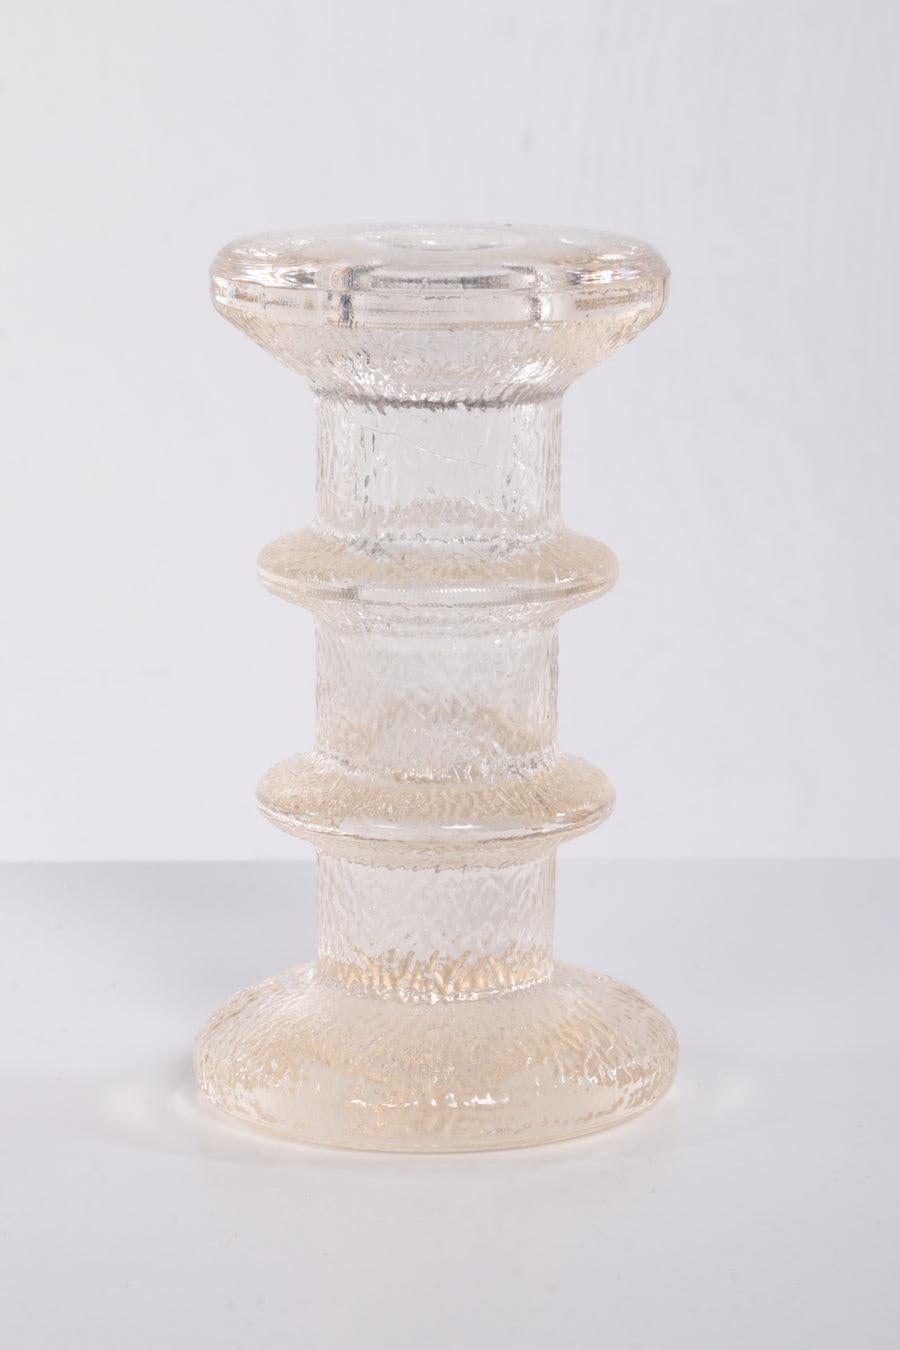 Glass Candlesticks Design by Staffan Gellerstedt, 1970s

A glass candlestick from Scandinavia: candlestick/candle holder with multiple rings design by Staffan Gellerstedt made by Pukeberg 1966.

This glass object from the 1970s 
has a predominantly